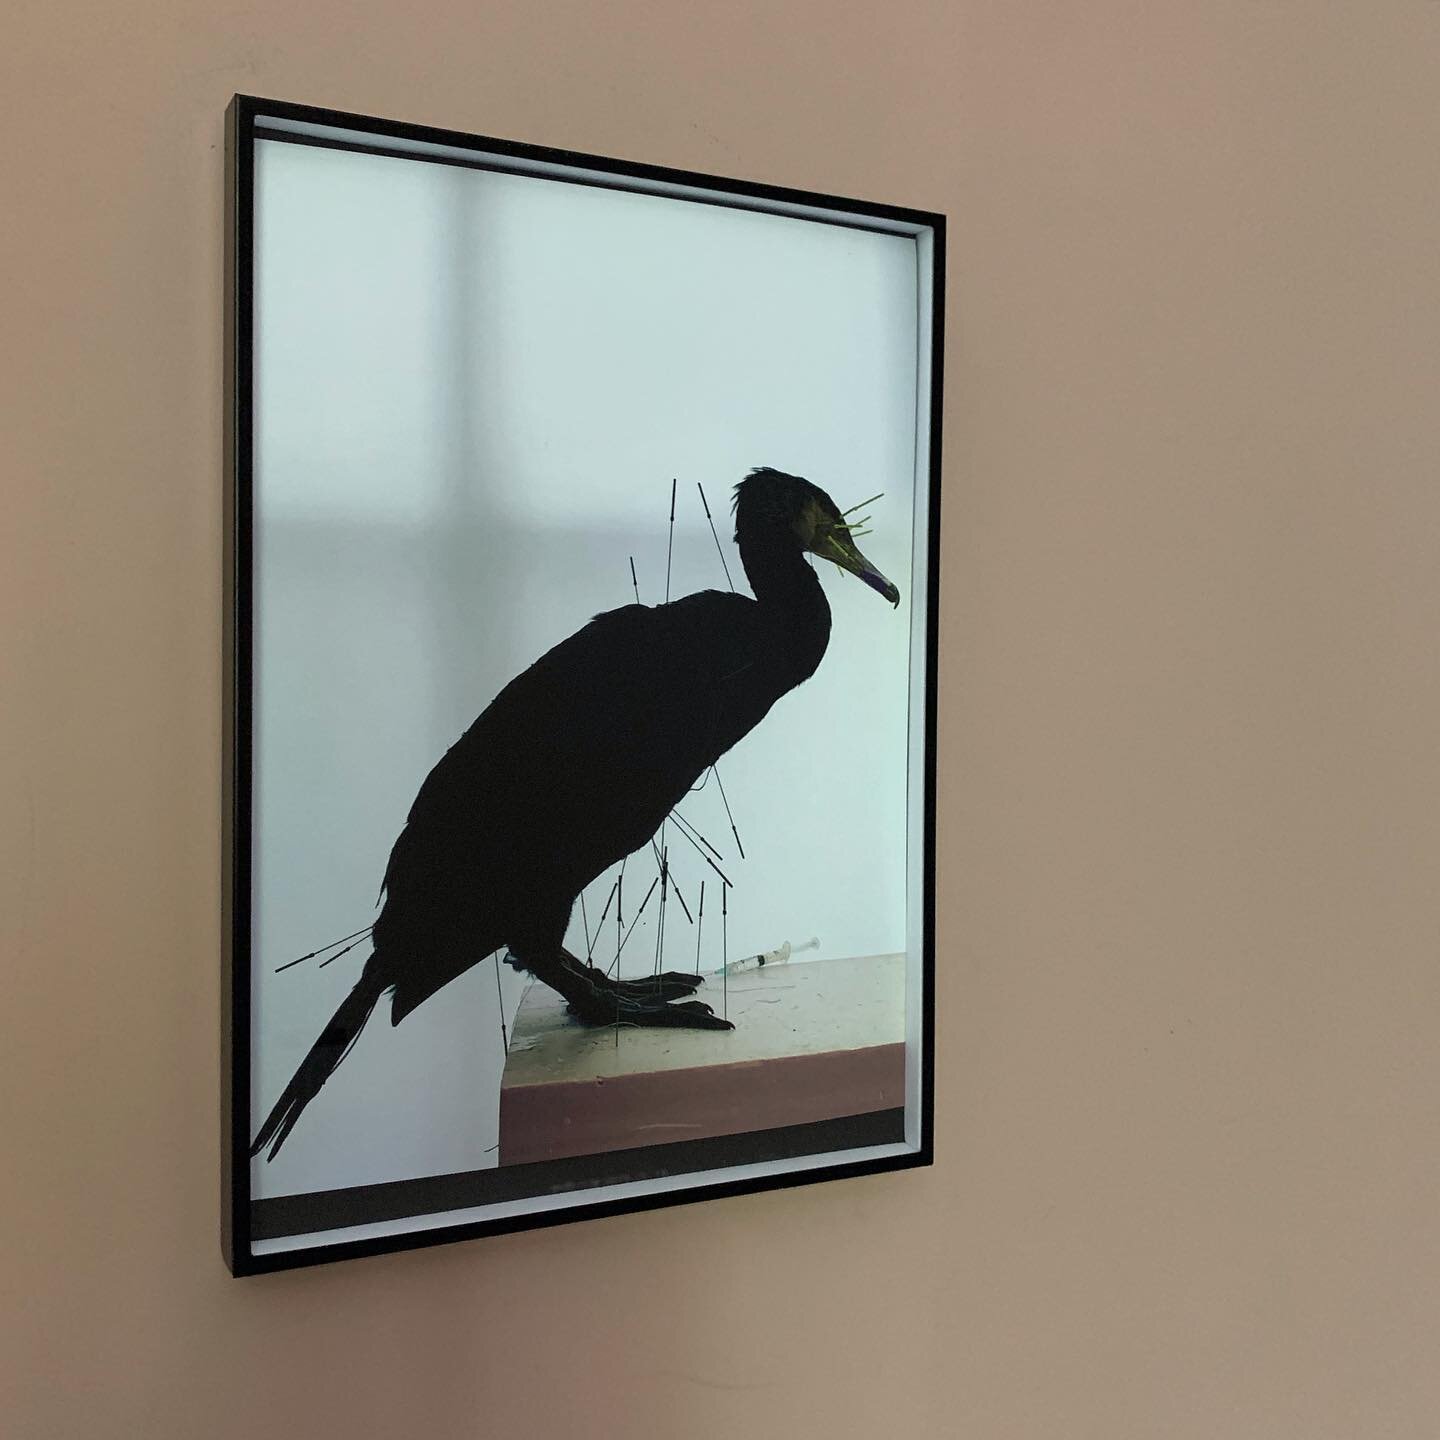 Photograph of a cormorant, the angle is a sideways to avoid the reflection in the glass.

A4
Hahnem&uuml;hle print
Framed

For sale

#photography #fotografie #aalscholver #cormorant #wallart #opgezettedieren #taxidermie #taxidermy #taxidermyart #wund